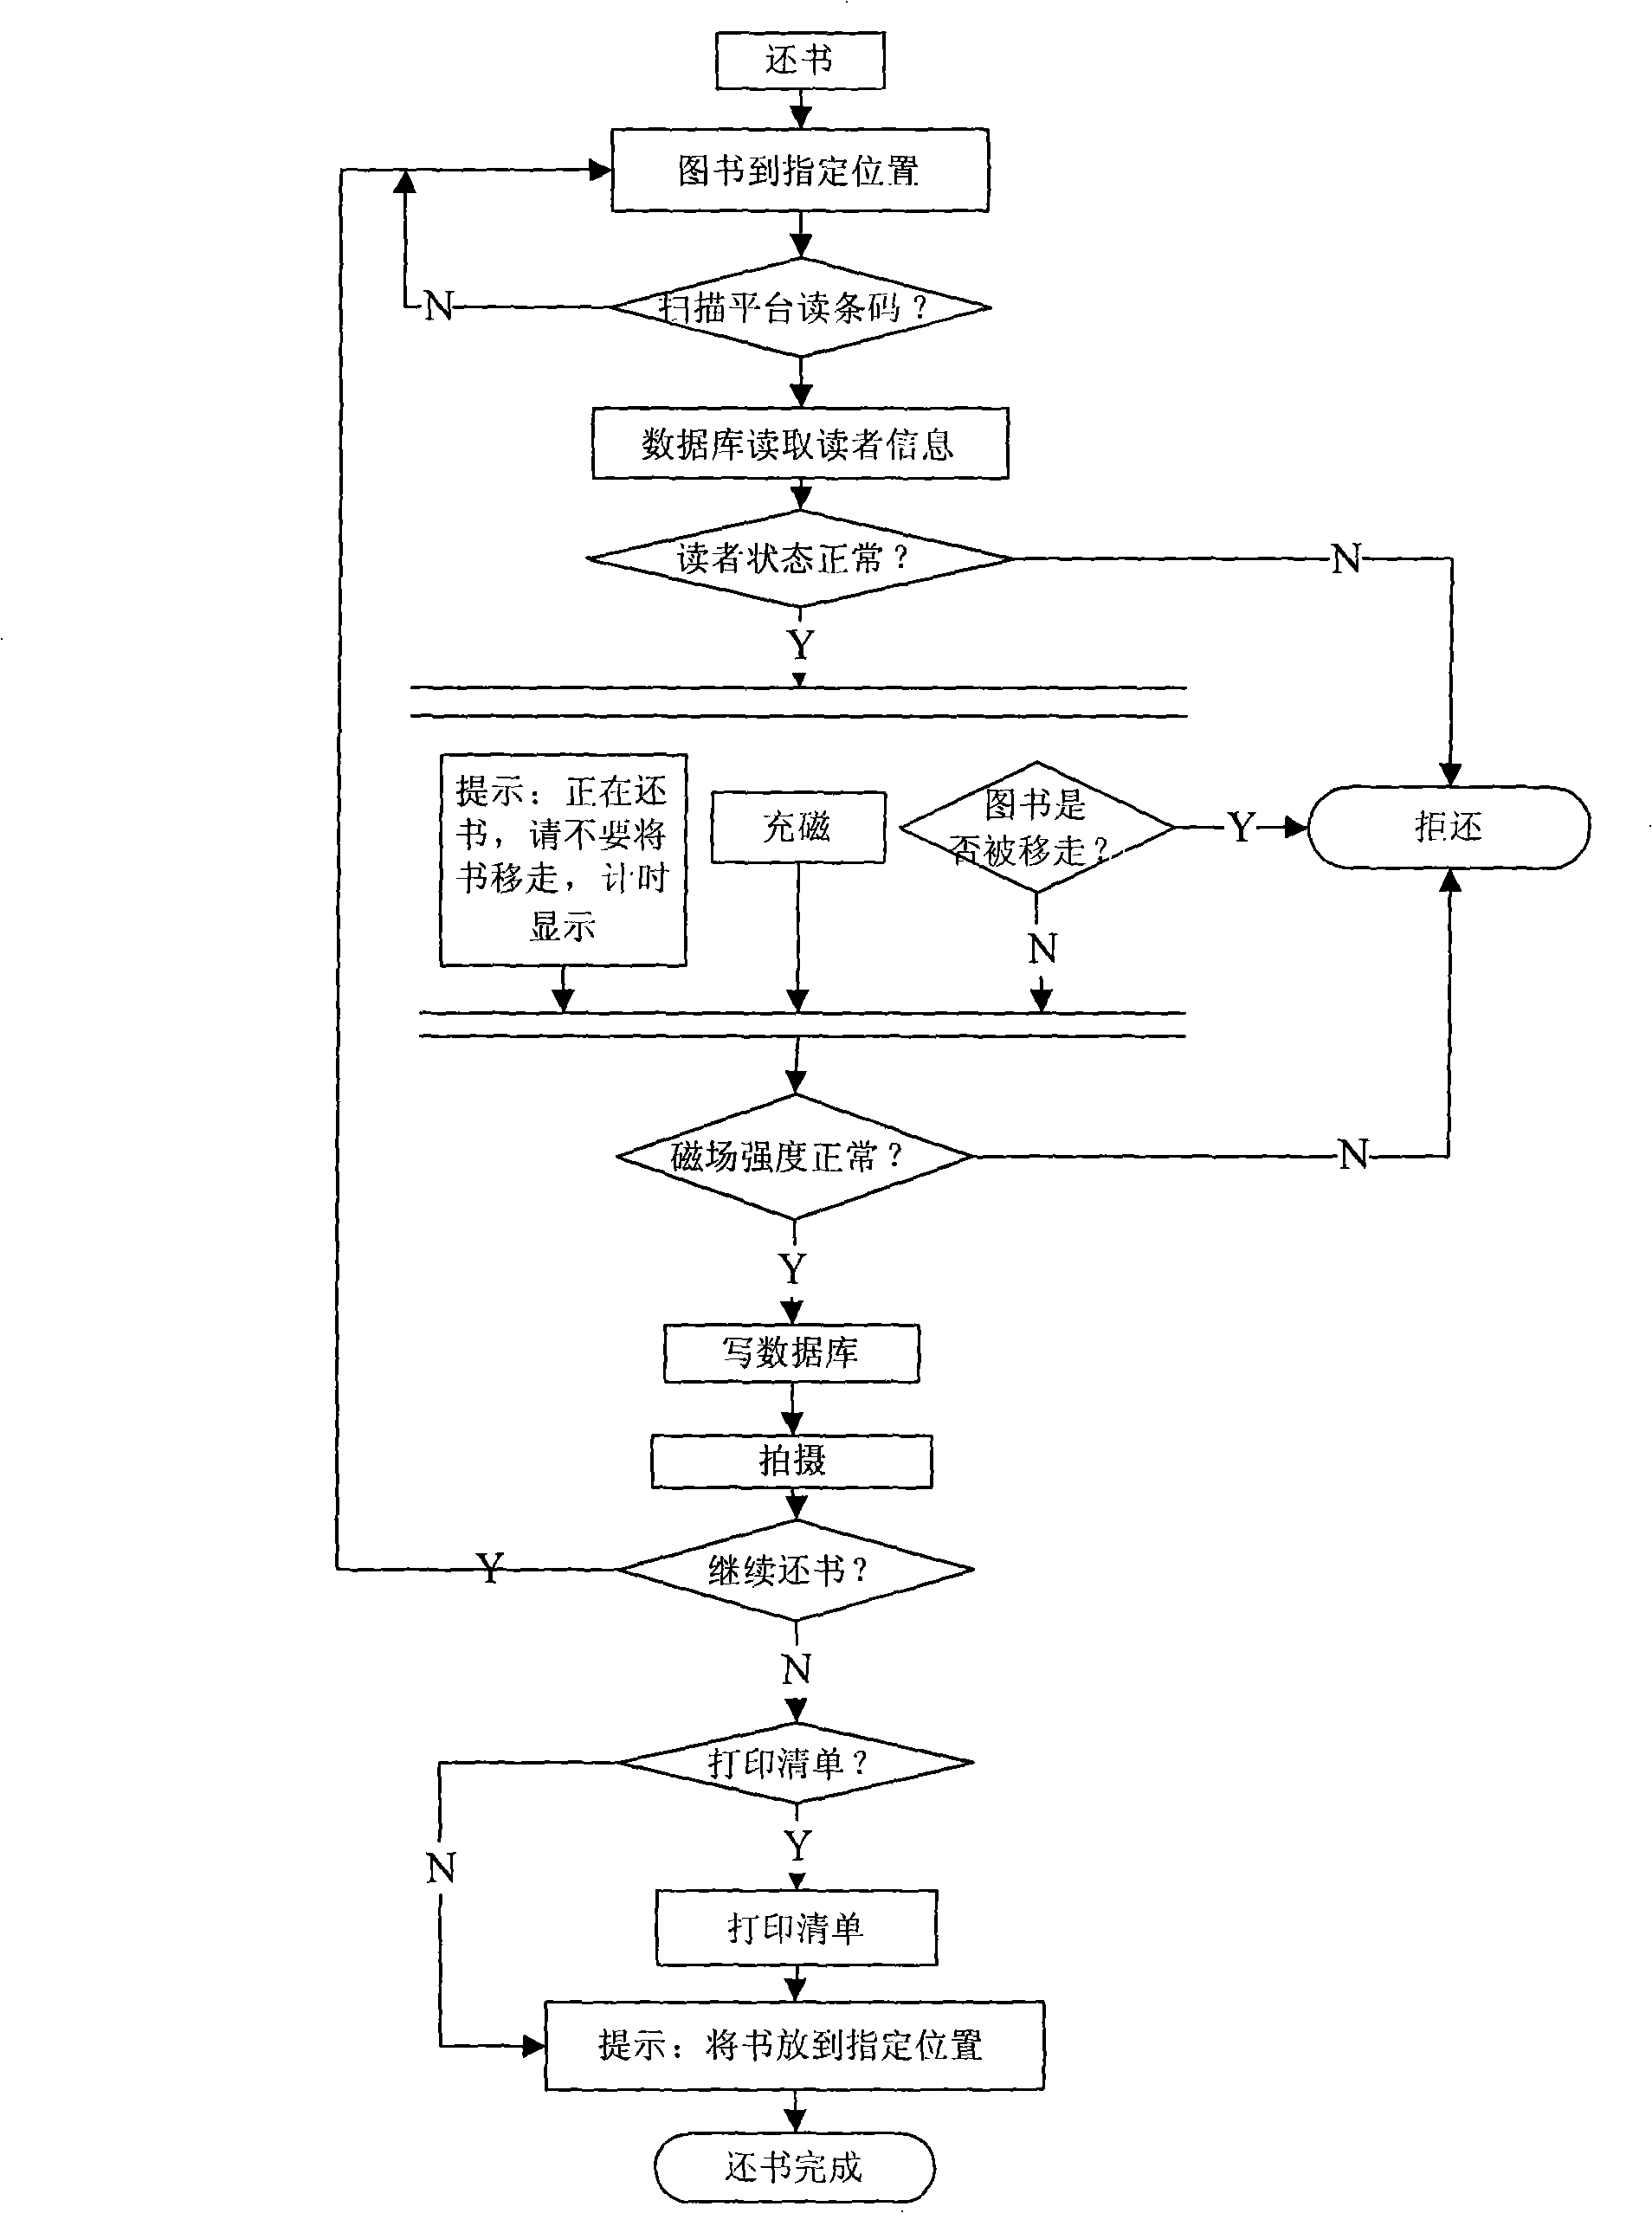 Self-help type book-borrowing and lending system and method